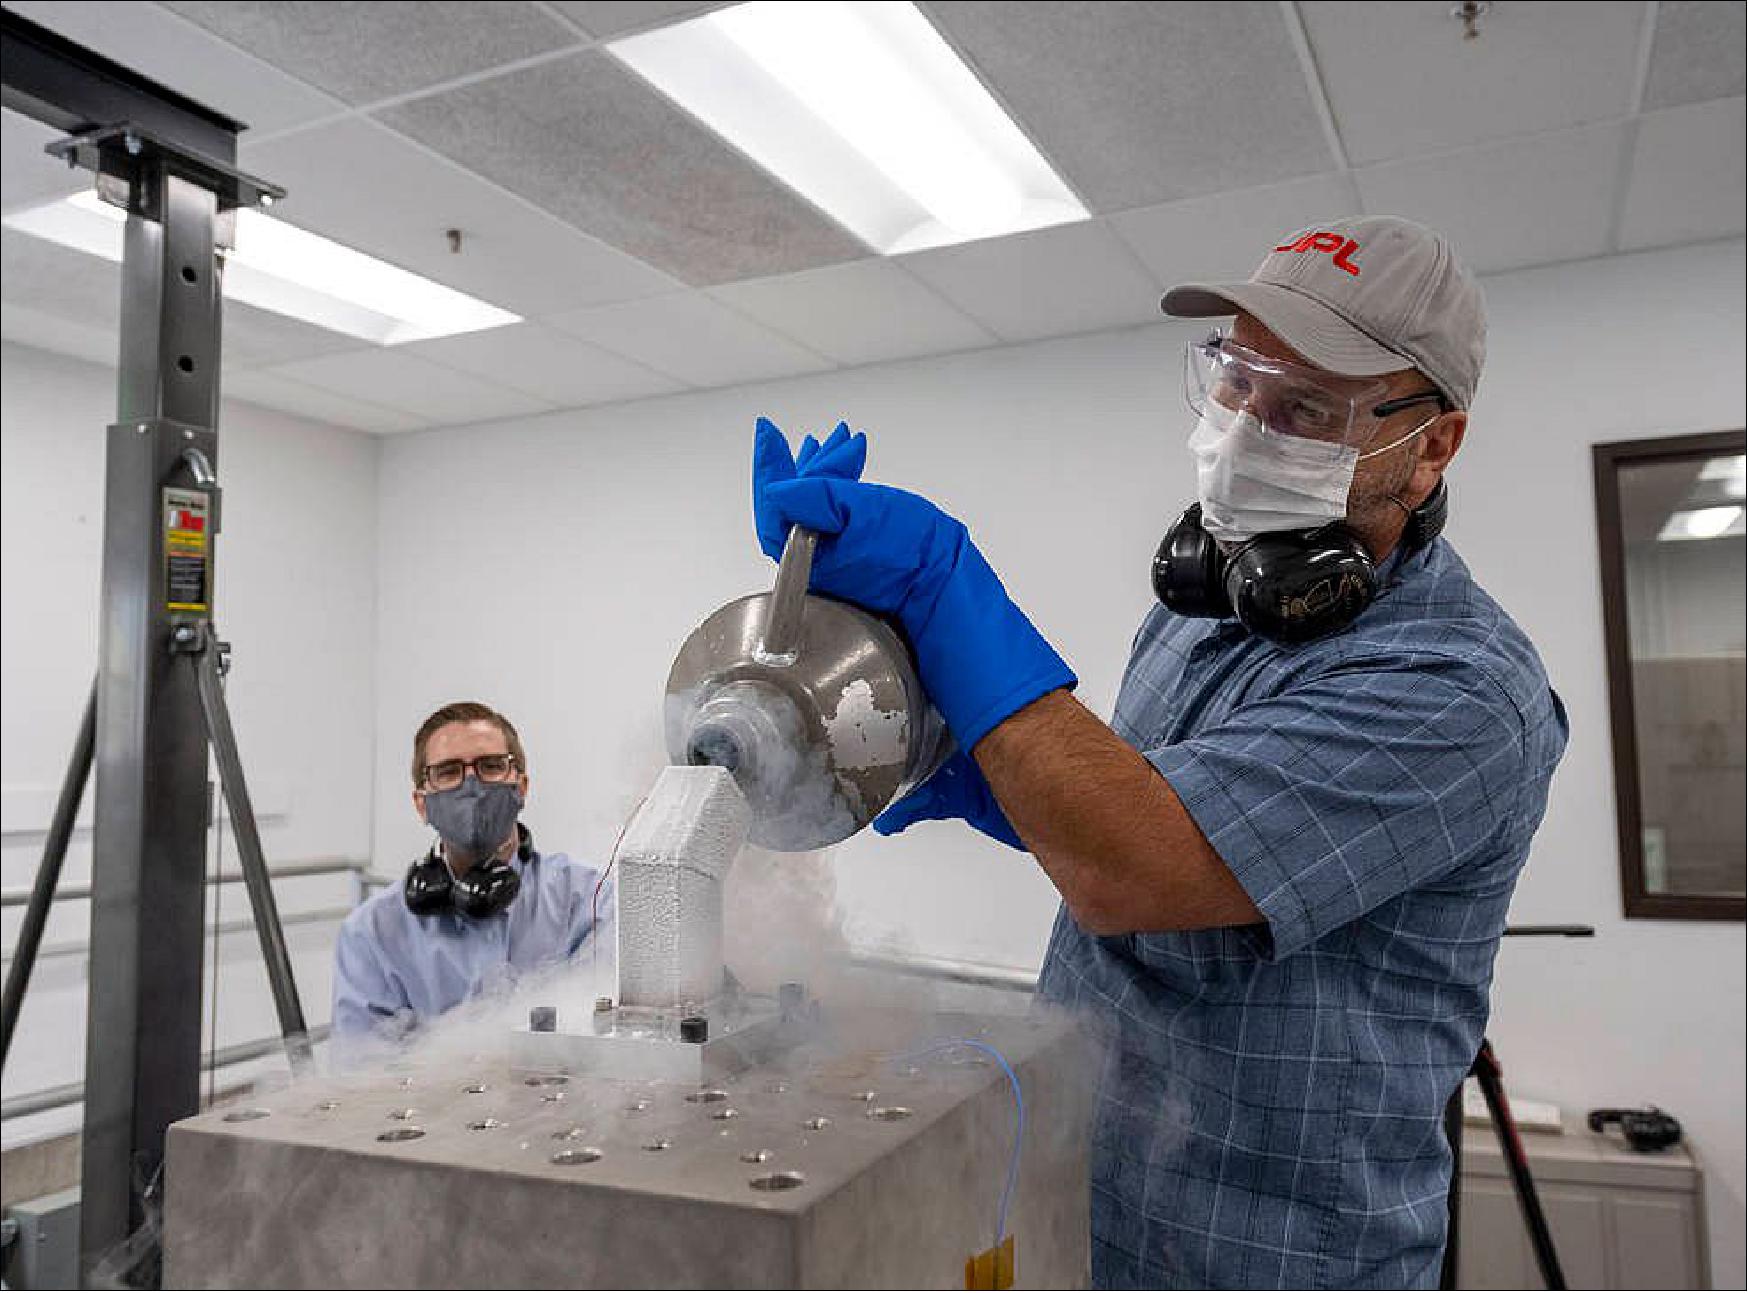 Figure 36: Andrew Kennett (left) watches as Dominic Aldi (right) uses liquid nitrogen to cool a motor integrated bulk metallic glass gearbox prior to shock testing it. The motor and gearbox are inside the frosty metal “bucket” that contains the liquid nitrogen. The tooling, including the “bucket” is designed to be mounted both vertically (shown) and horizontally on the cube for testing the motor and gearbox in three orientations (image credit: NASA/JPL-Caltech)